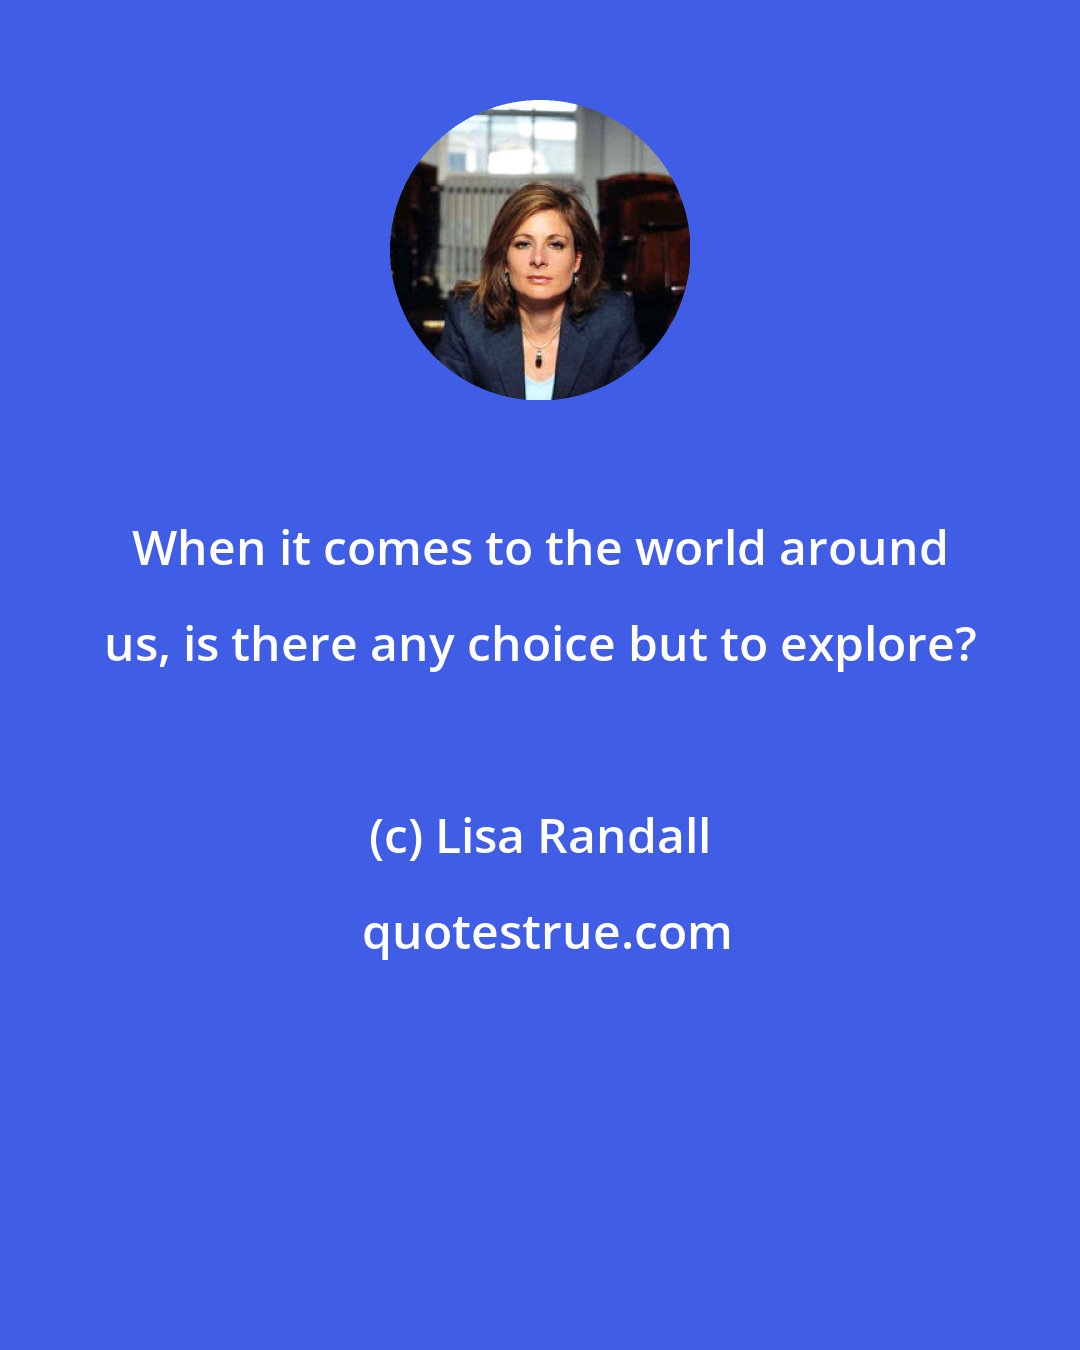 Lisa Randall: When it comes to the world around us, is there any choice but to explore?